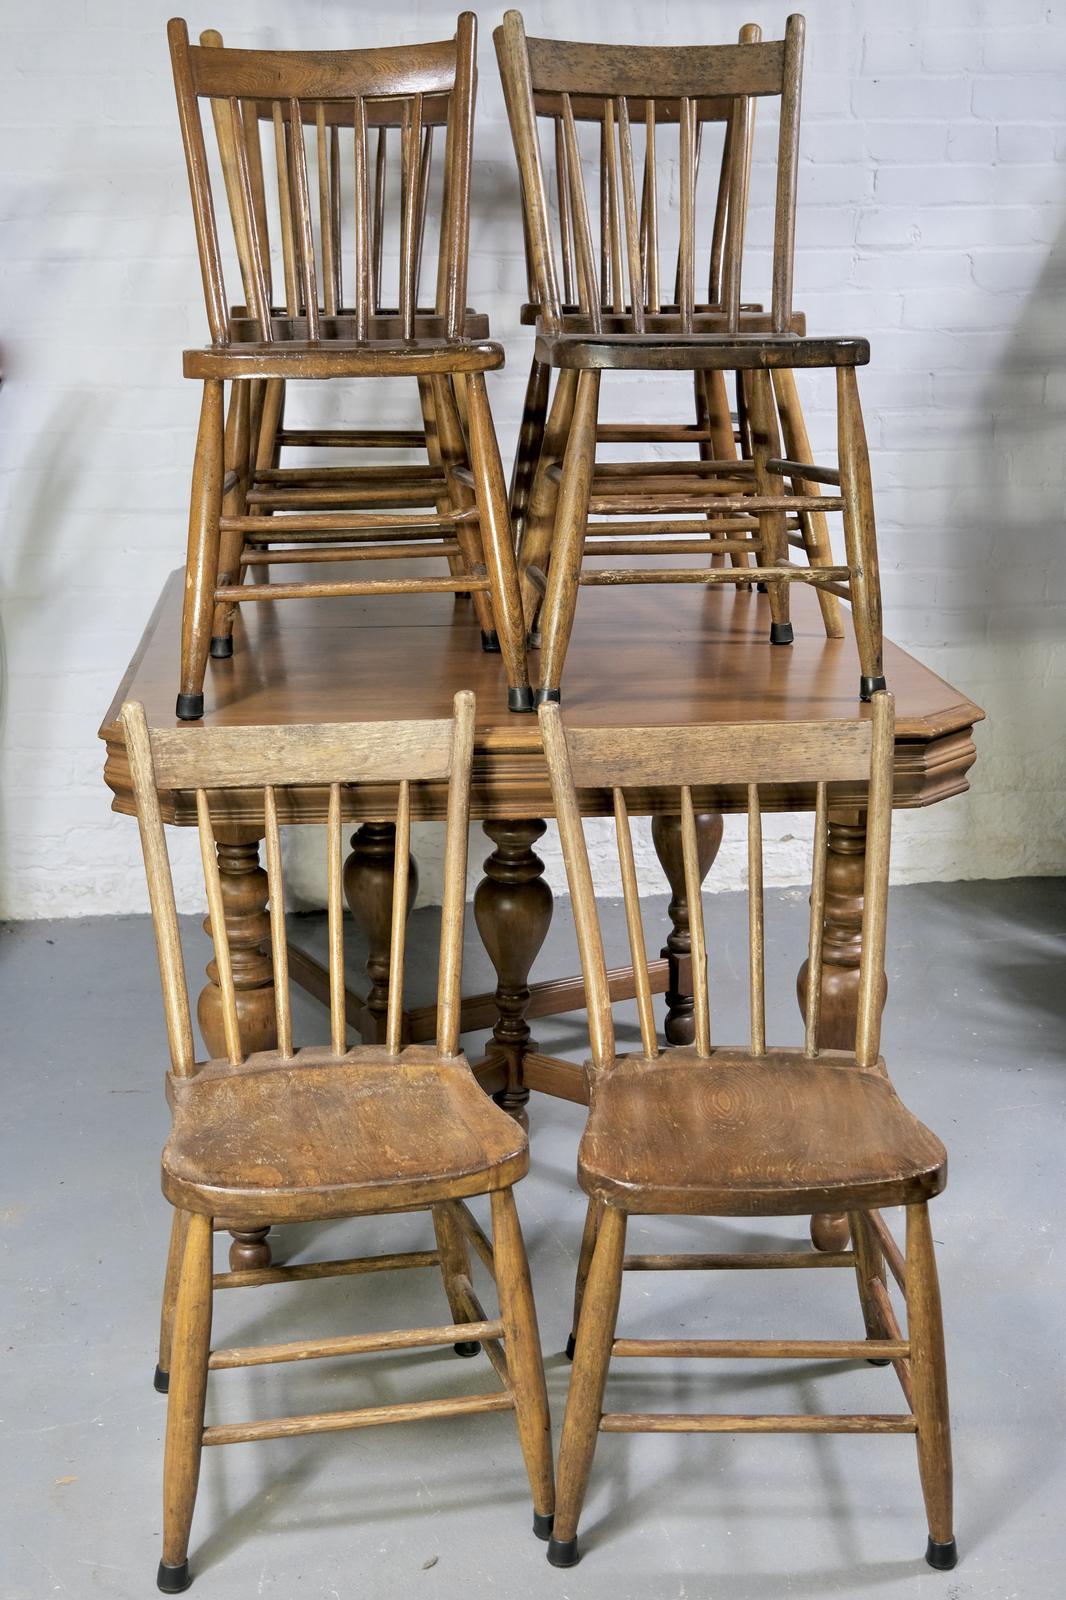 EIGHT CHAIRS